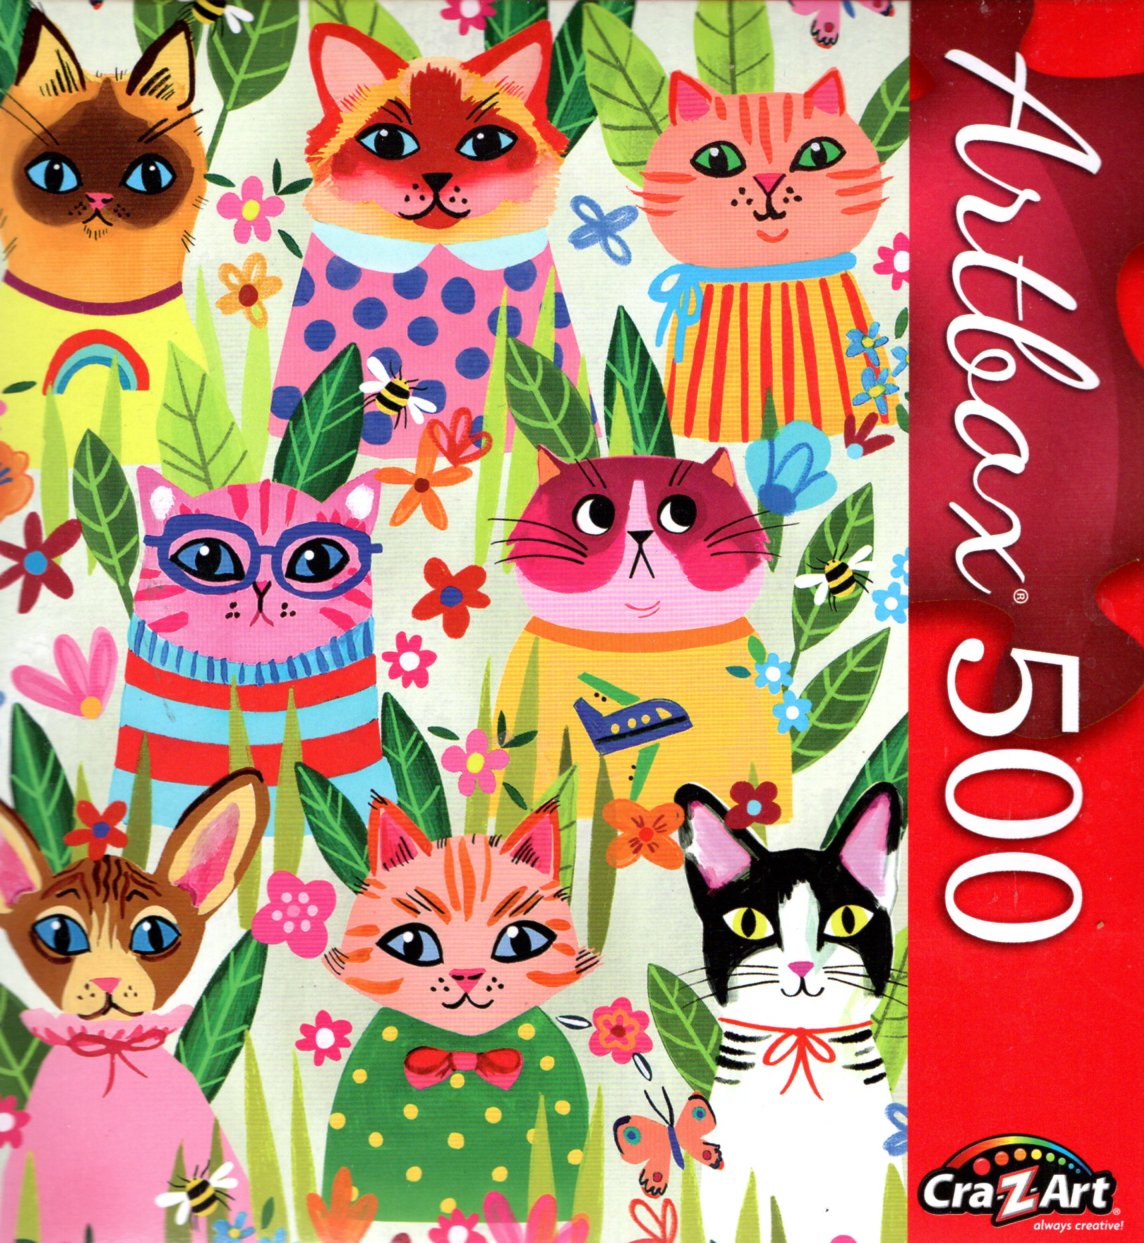 Puddy Cats - 500 Pieces Jigsaw Puzzle